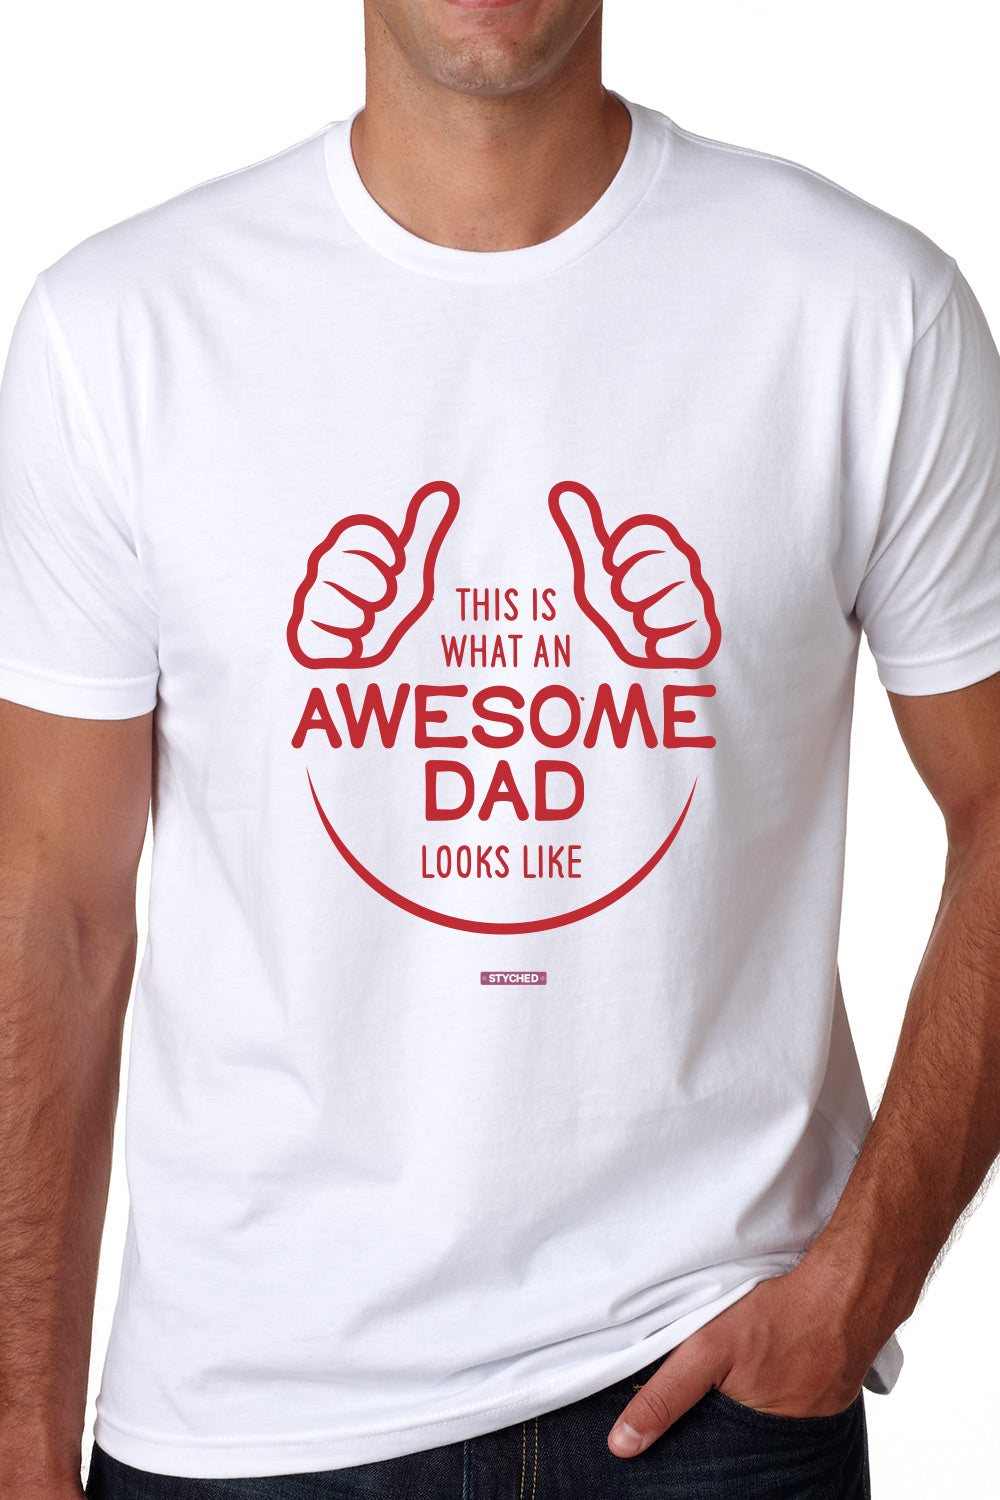 This is what an Awesome Dad looks like - Graphic T-Shirt White Color